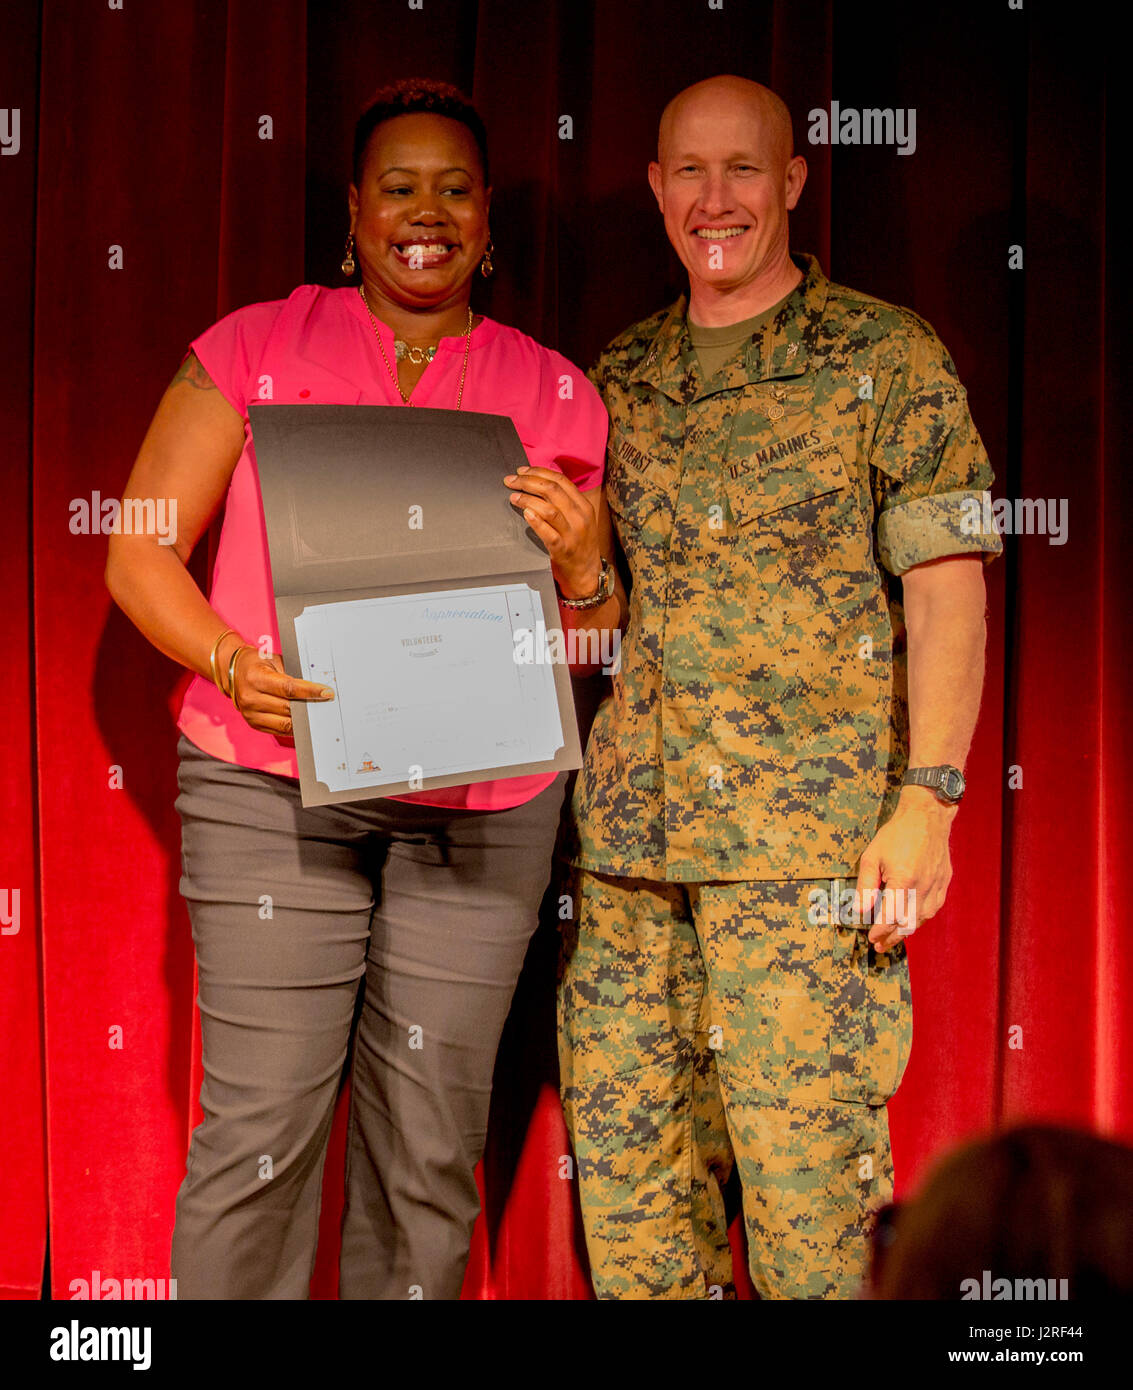 Carla Bates, a volunteer with the Girl Scouts of the United States of America, receives an award from U.S. Marine Corps Col. Richard F. Fuerst, commanding officer of Marine Corps Air Station Iwakuni, during the 8th Annual Installation Volunteer Ceremony at MCAS Iwakuni, Japan, April, 26, 2017. The event was designed to show appreciation and recognition for service members and civilians who volunteered on the installation throughout 2016. Bates was one of the top three civilians who contributed the most volunteer service hours. (U.S. Marine Corps photo by Pfc. Stephen Campbell) Stock Photo